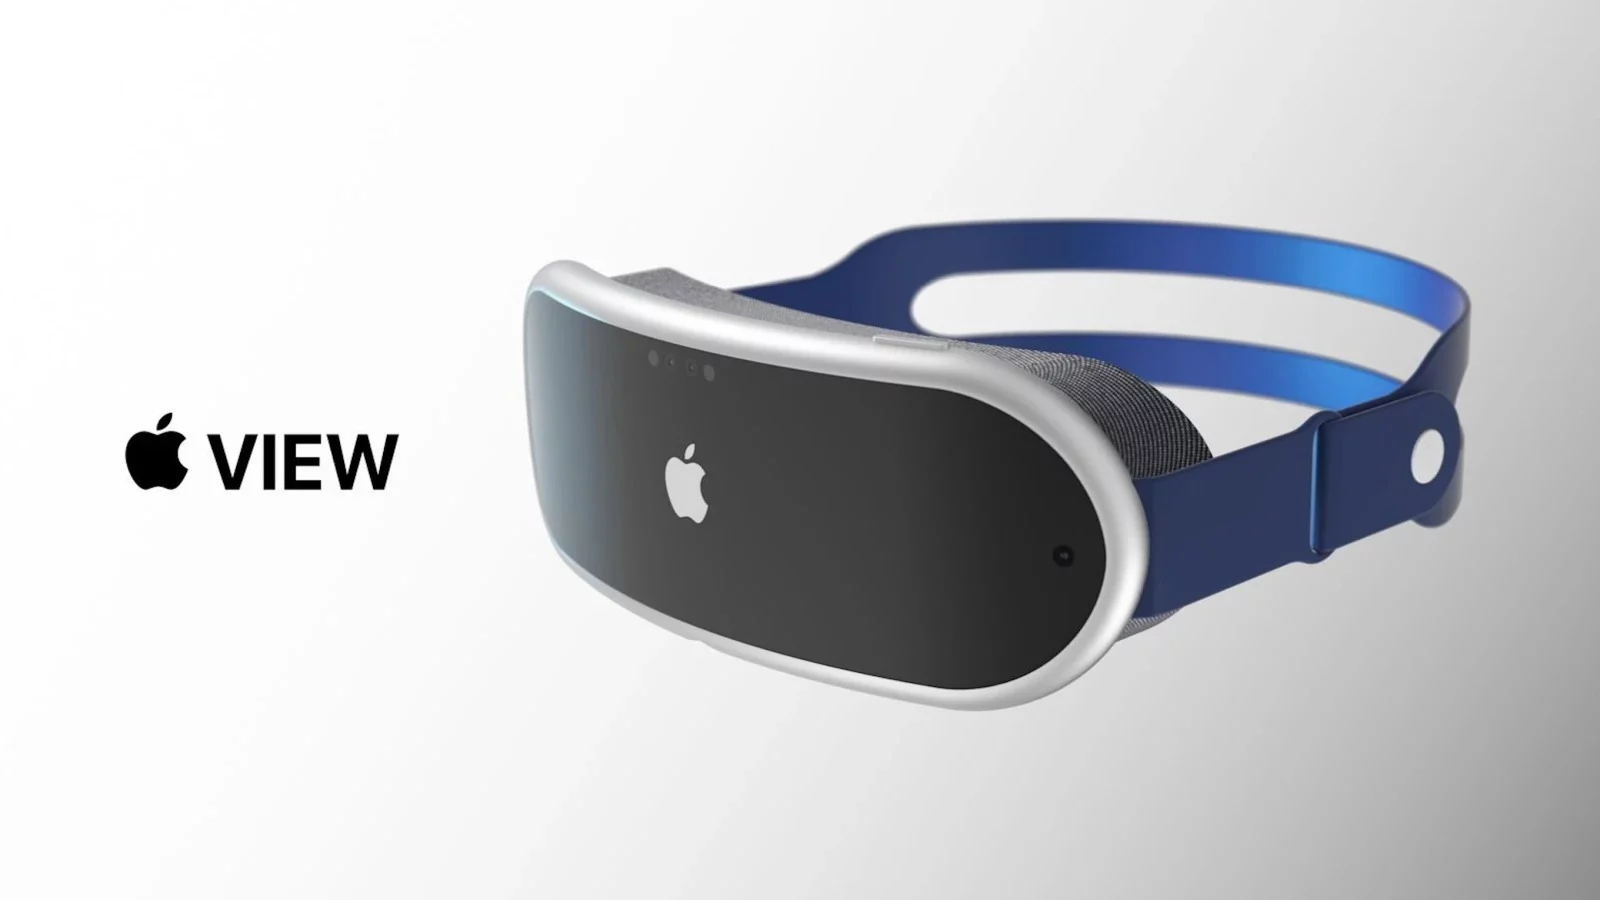 Apples AR headset will scan your jpeg